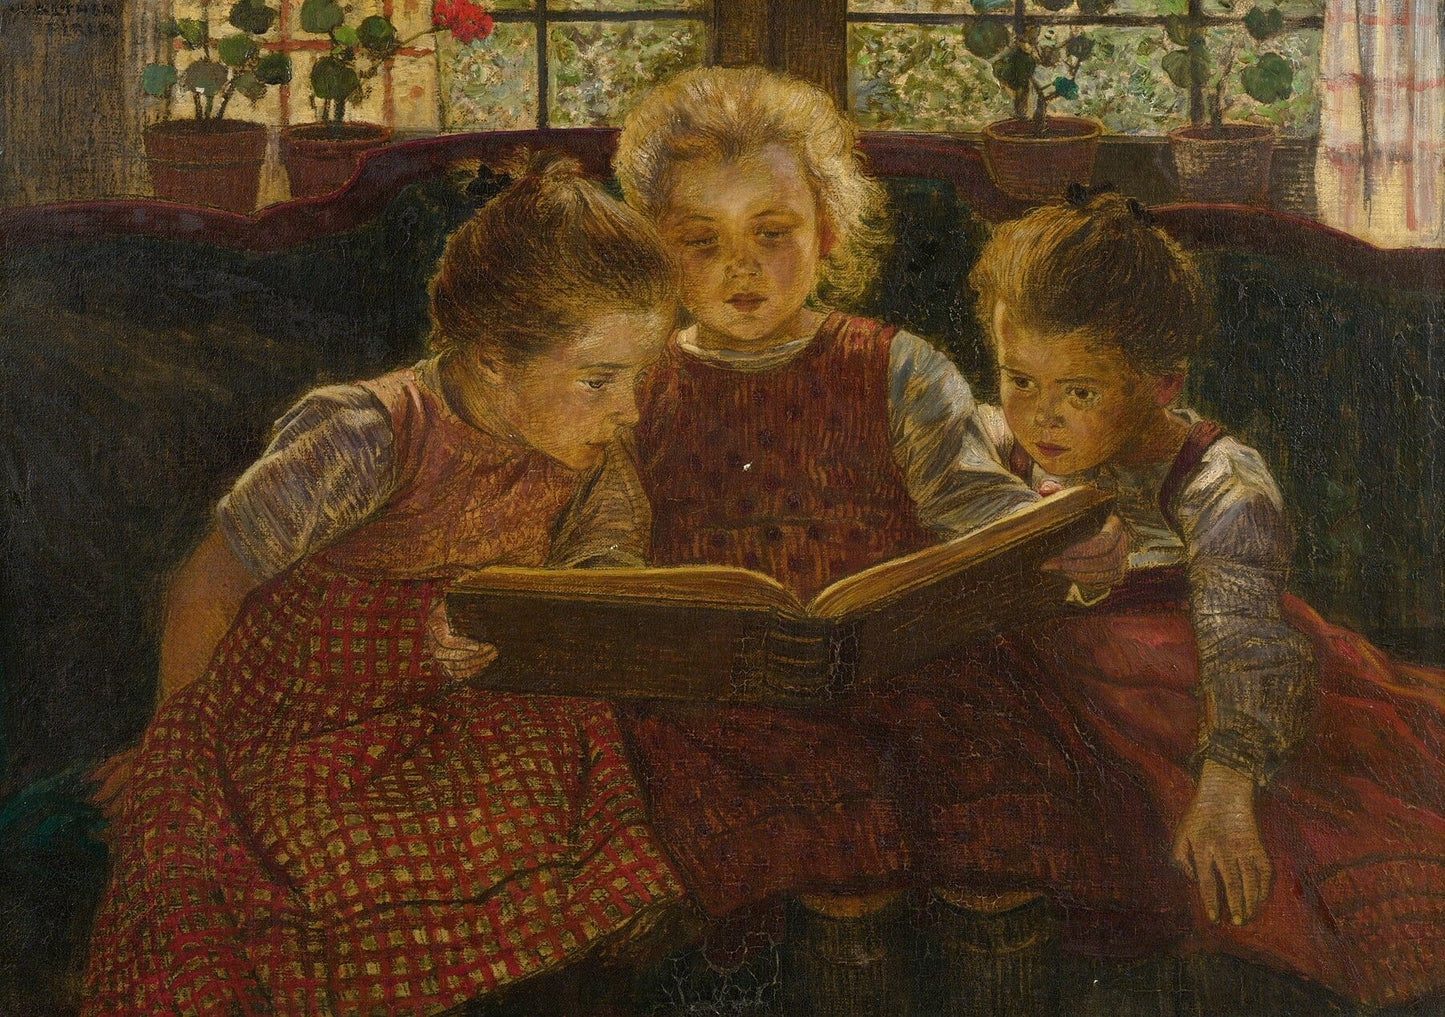 Walter Firle "The Fairy Tale" print  (1900s) Posters, Prints, & Visual Artwork The Trumpet Shop   